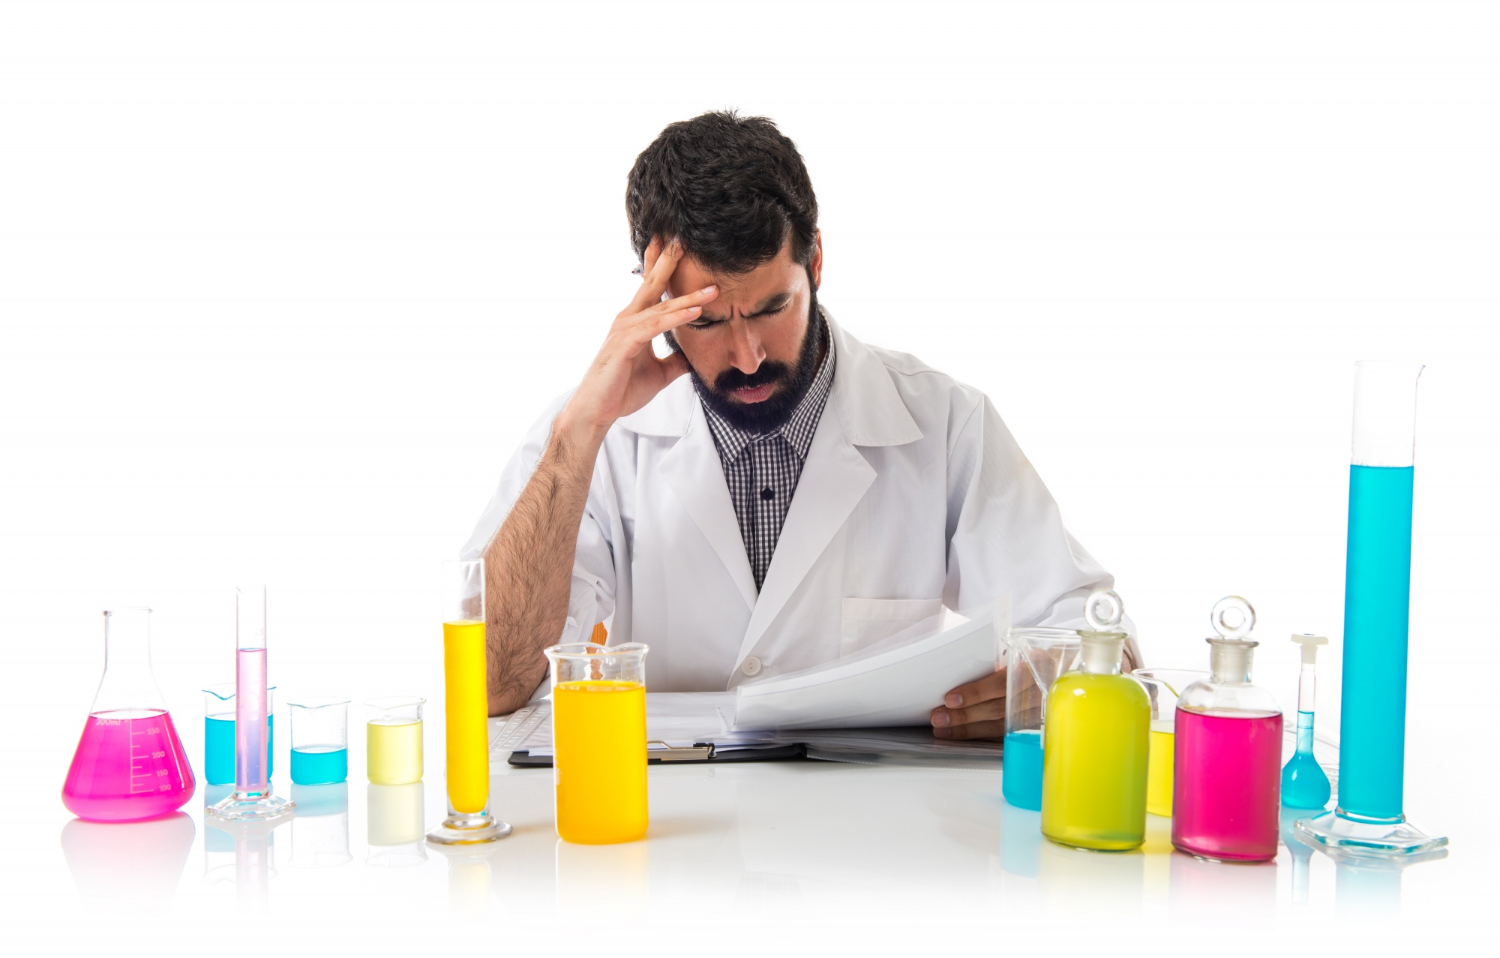 Ace Your Chemistry Exam Stress-Free: Hire an Expert to Take Your Online Chemistry Exam for You